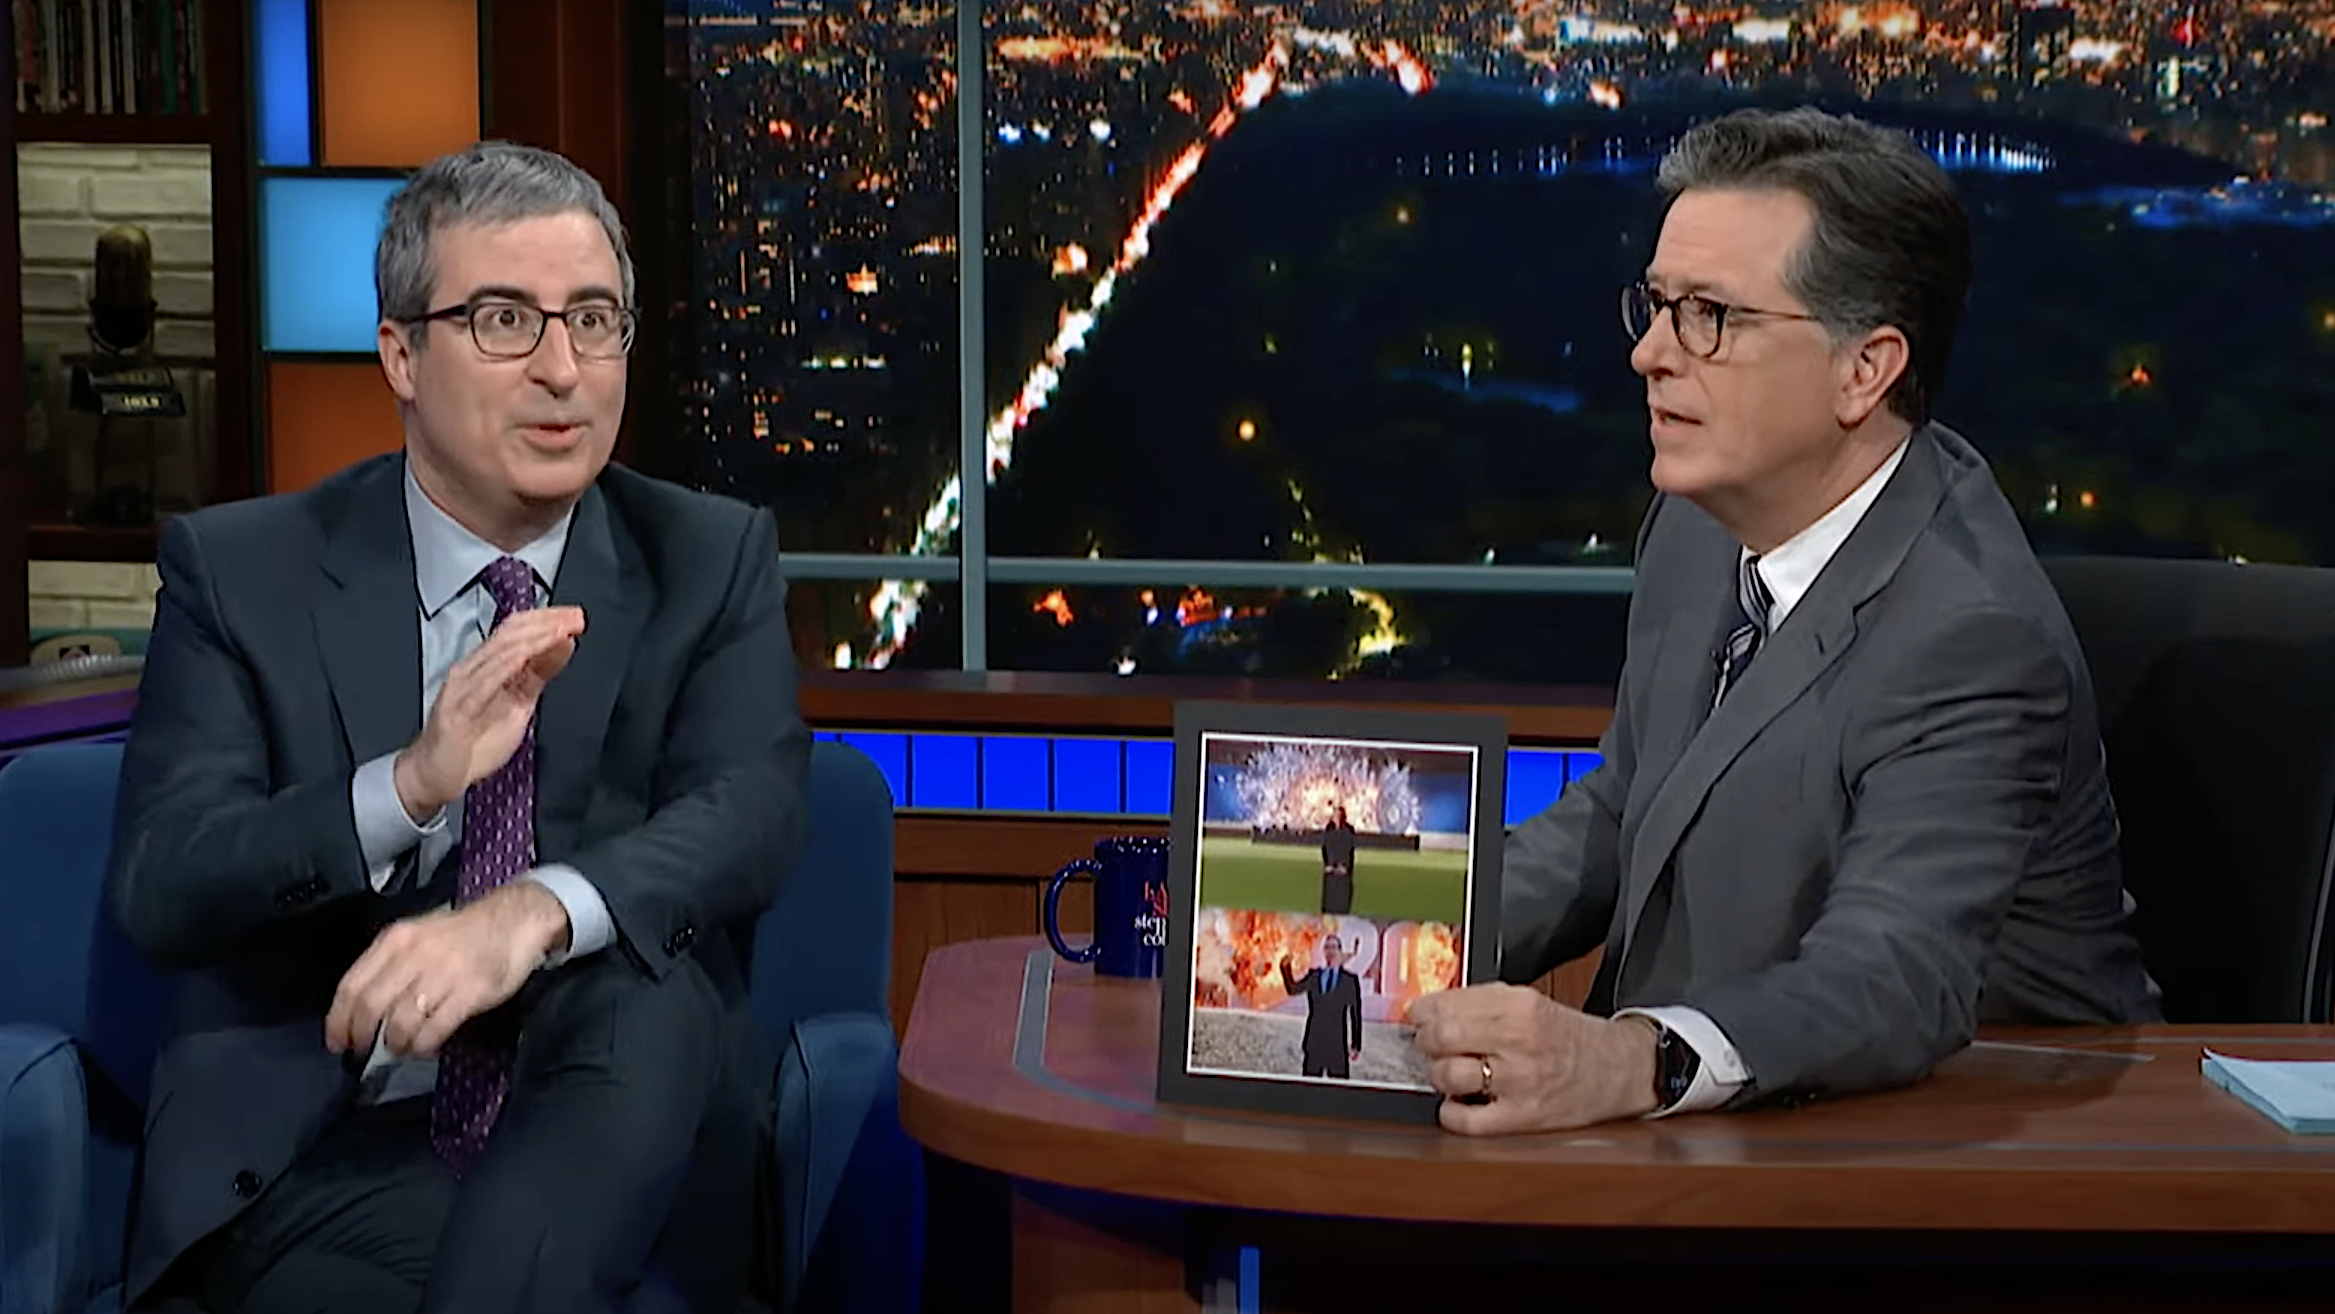 John Oliver only hopes Last Week Tonight‘s ninth season doesn’t end by blowing up 2022 real good